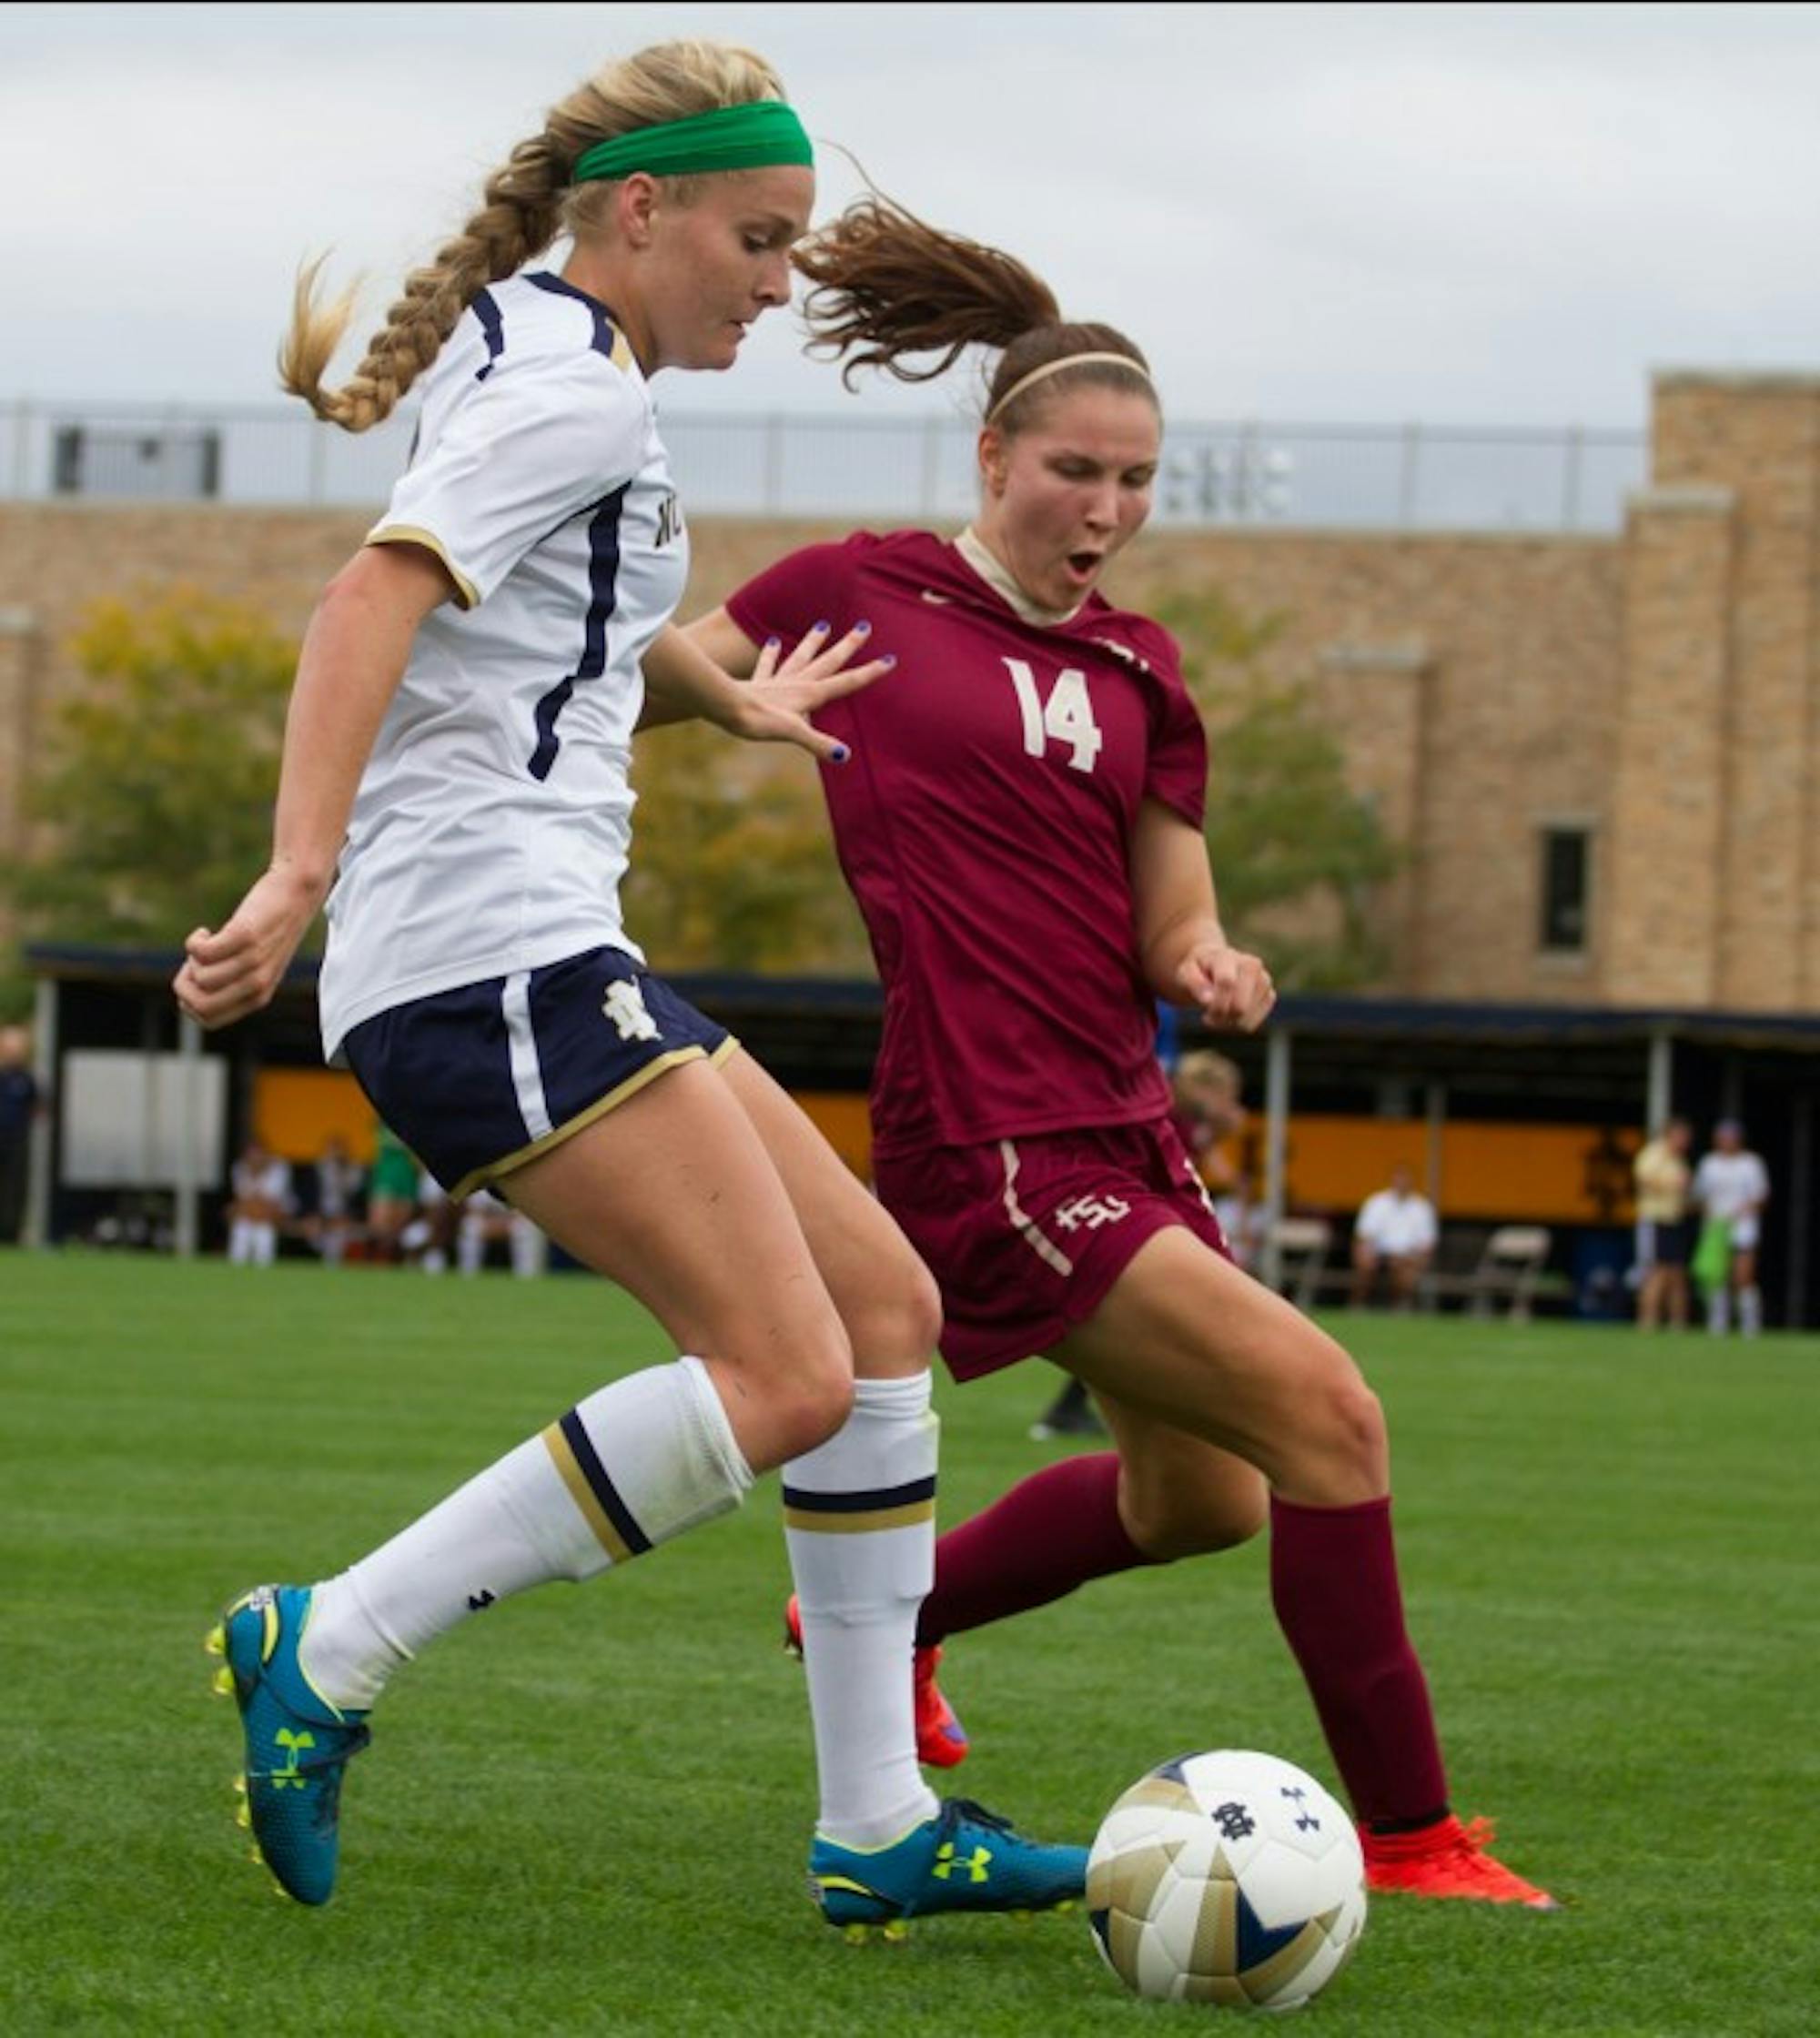 Freshman forward Natalie Jacobs dribbles the ball past the defender during Notre Dame’s 1-0 overtime loss to Florida State at Alumni Stadium on Sunday.